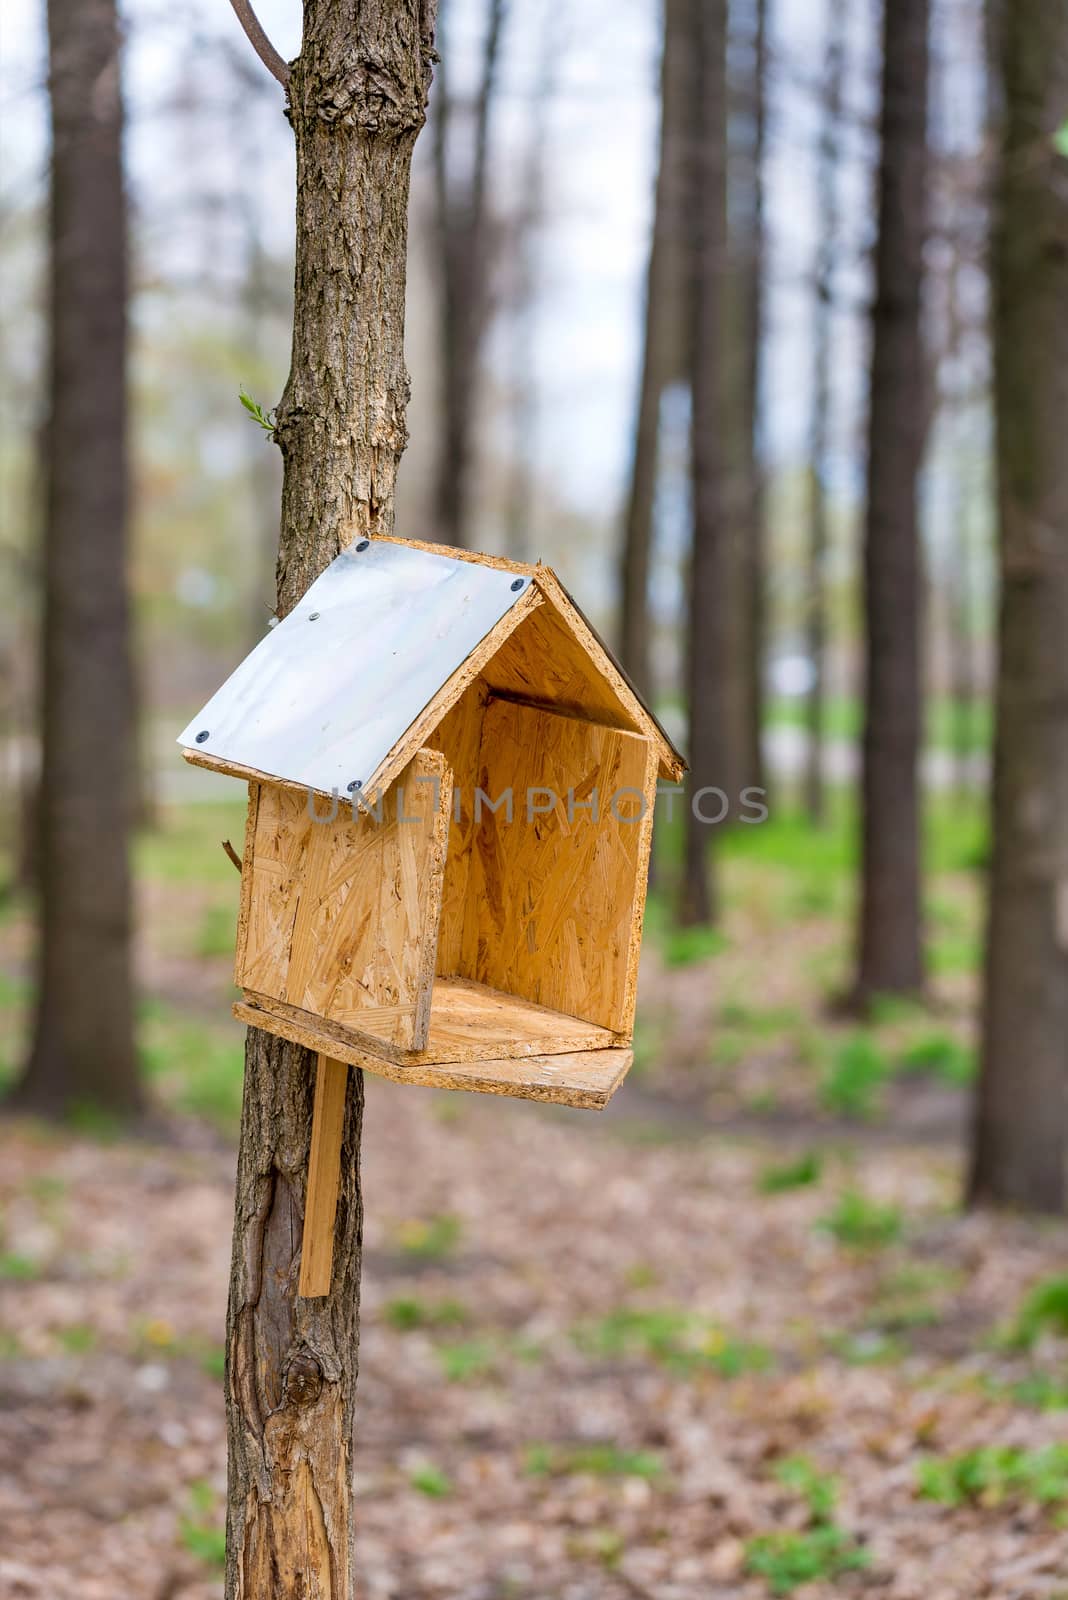 Handwork bird house made of chipboard and zinc in the woods during spring